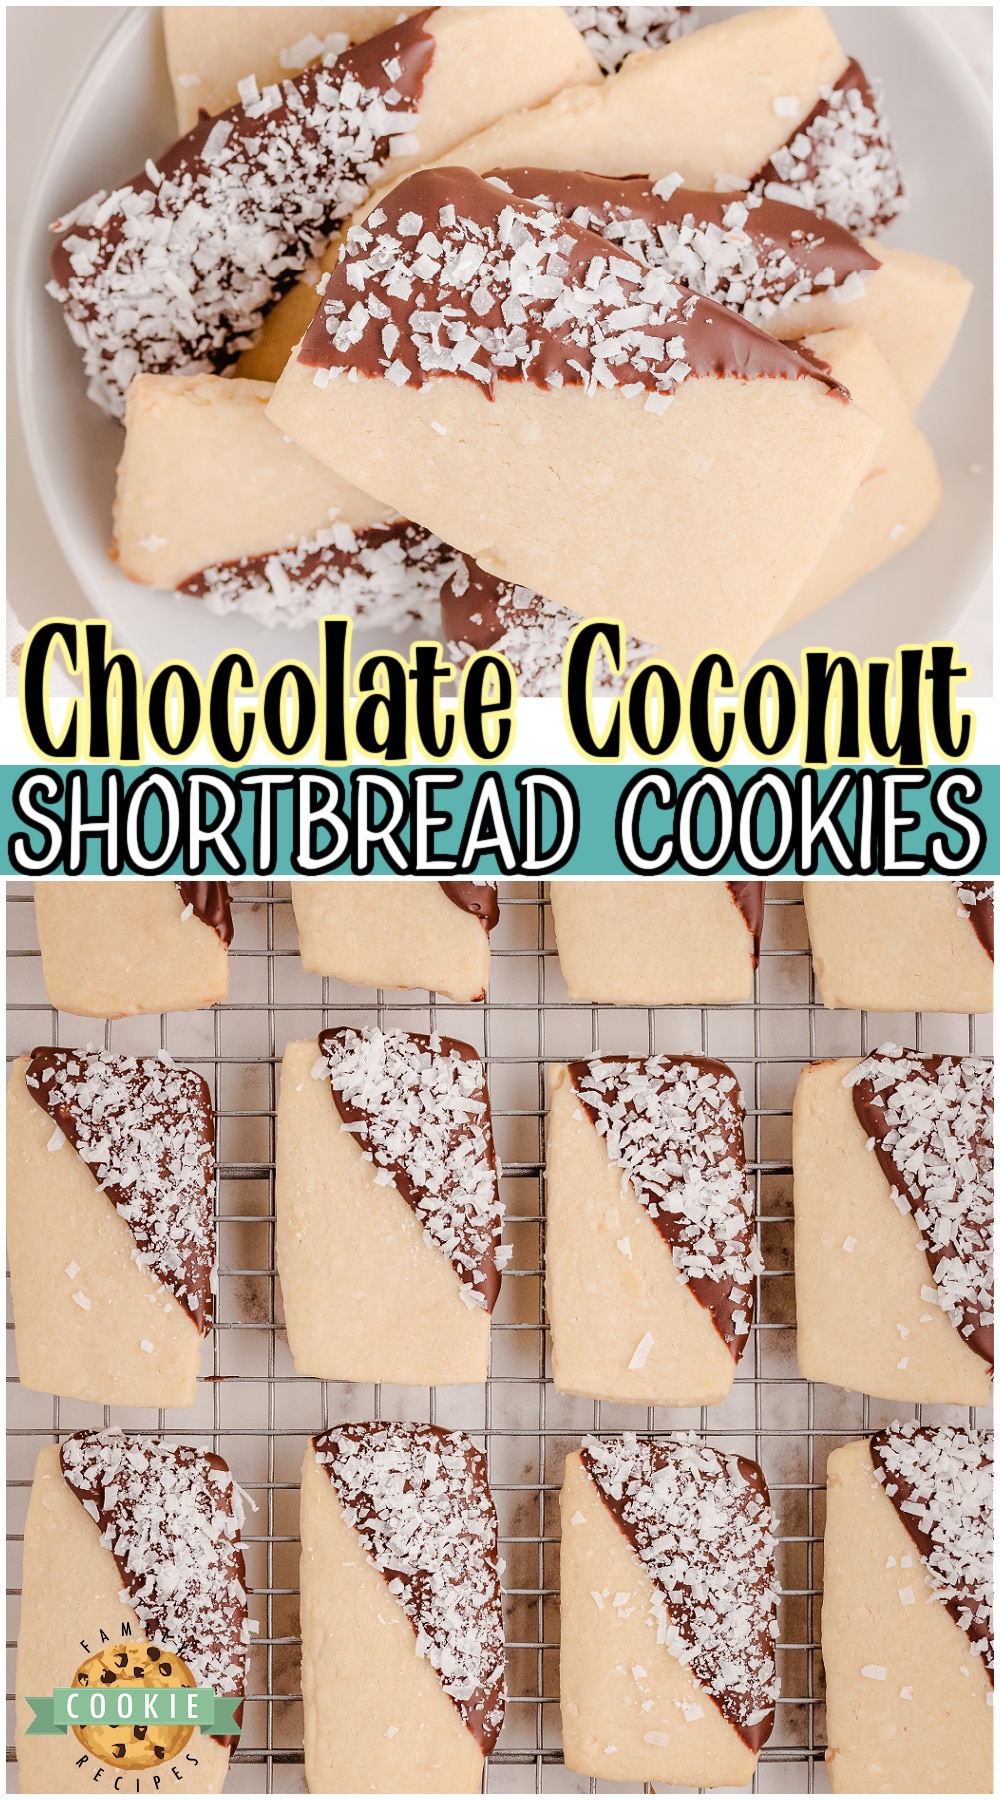 Coconut shortbread cookies are buttery, crisp shortbread cookies with fantastic coconut flavor! They're dipped in chocolate & dusted with more coconut for a delicious cookie combination.